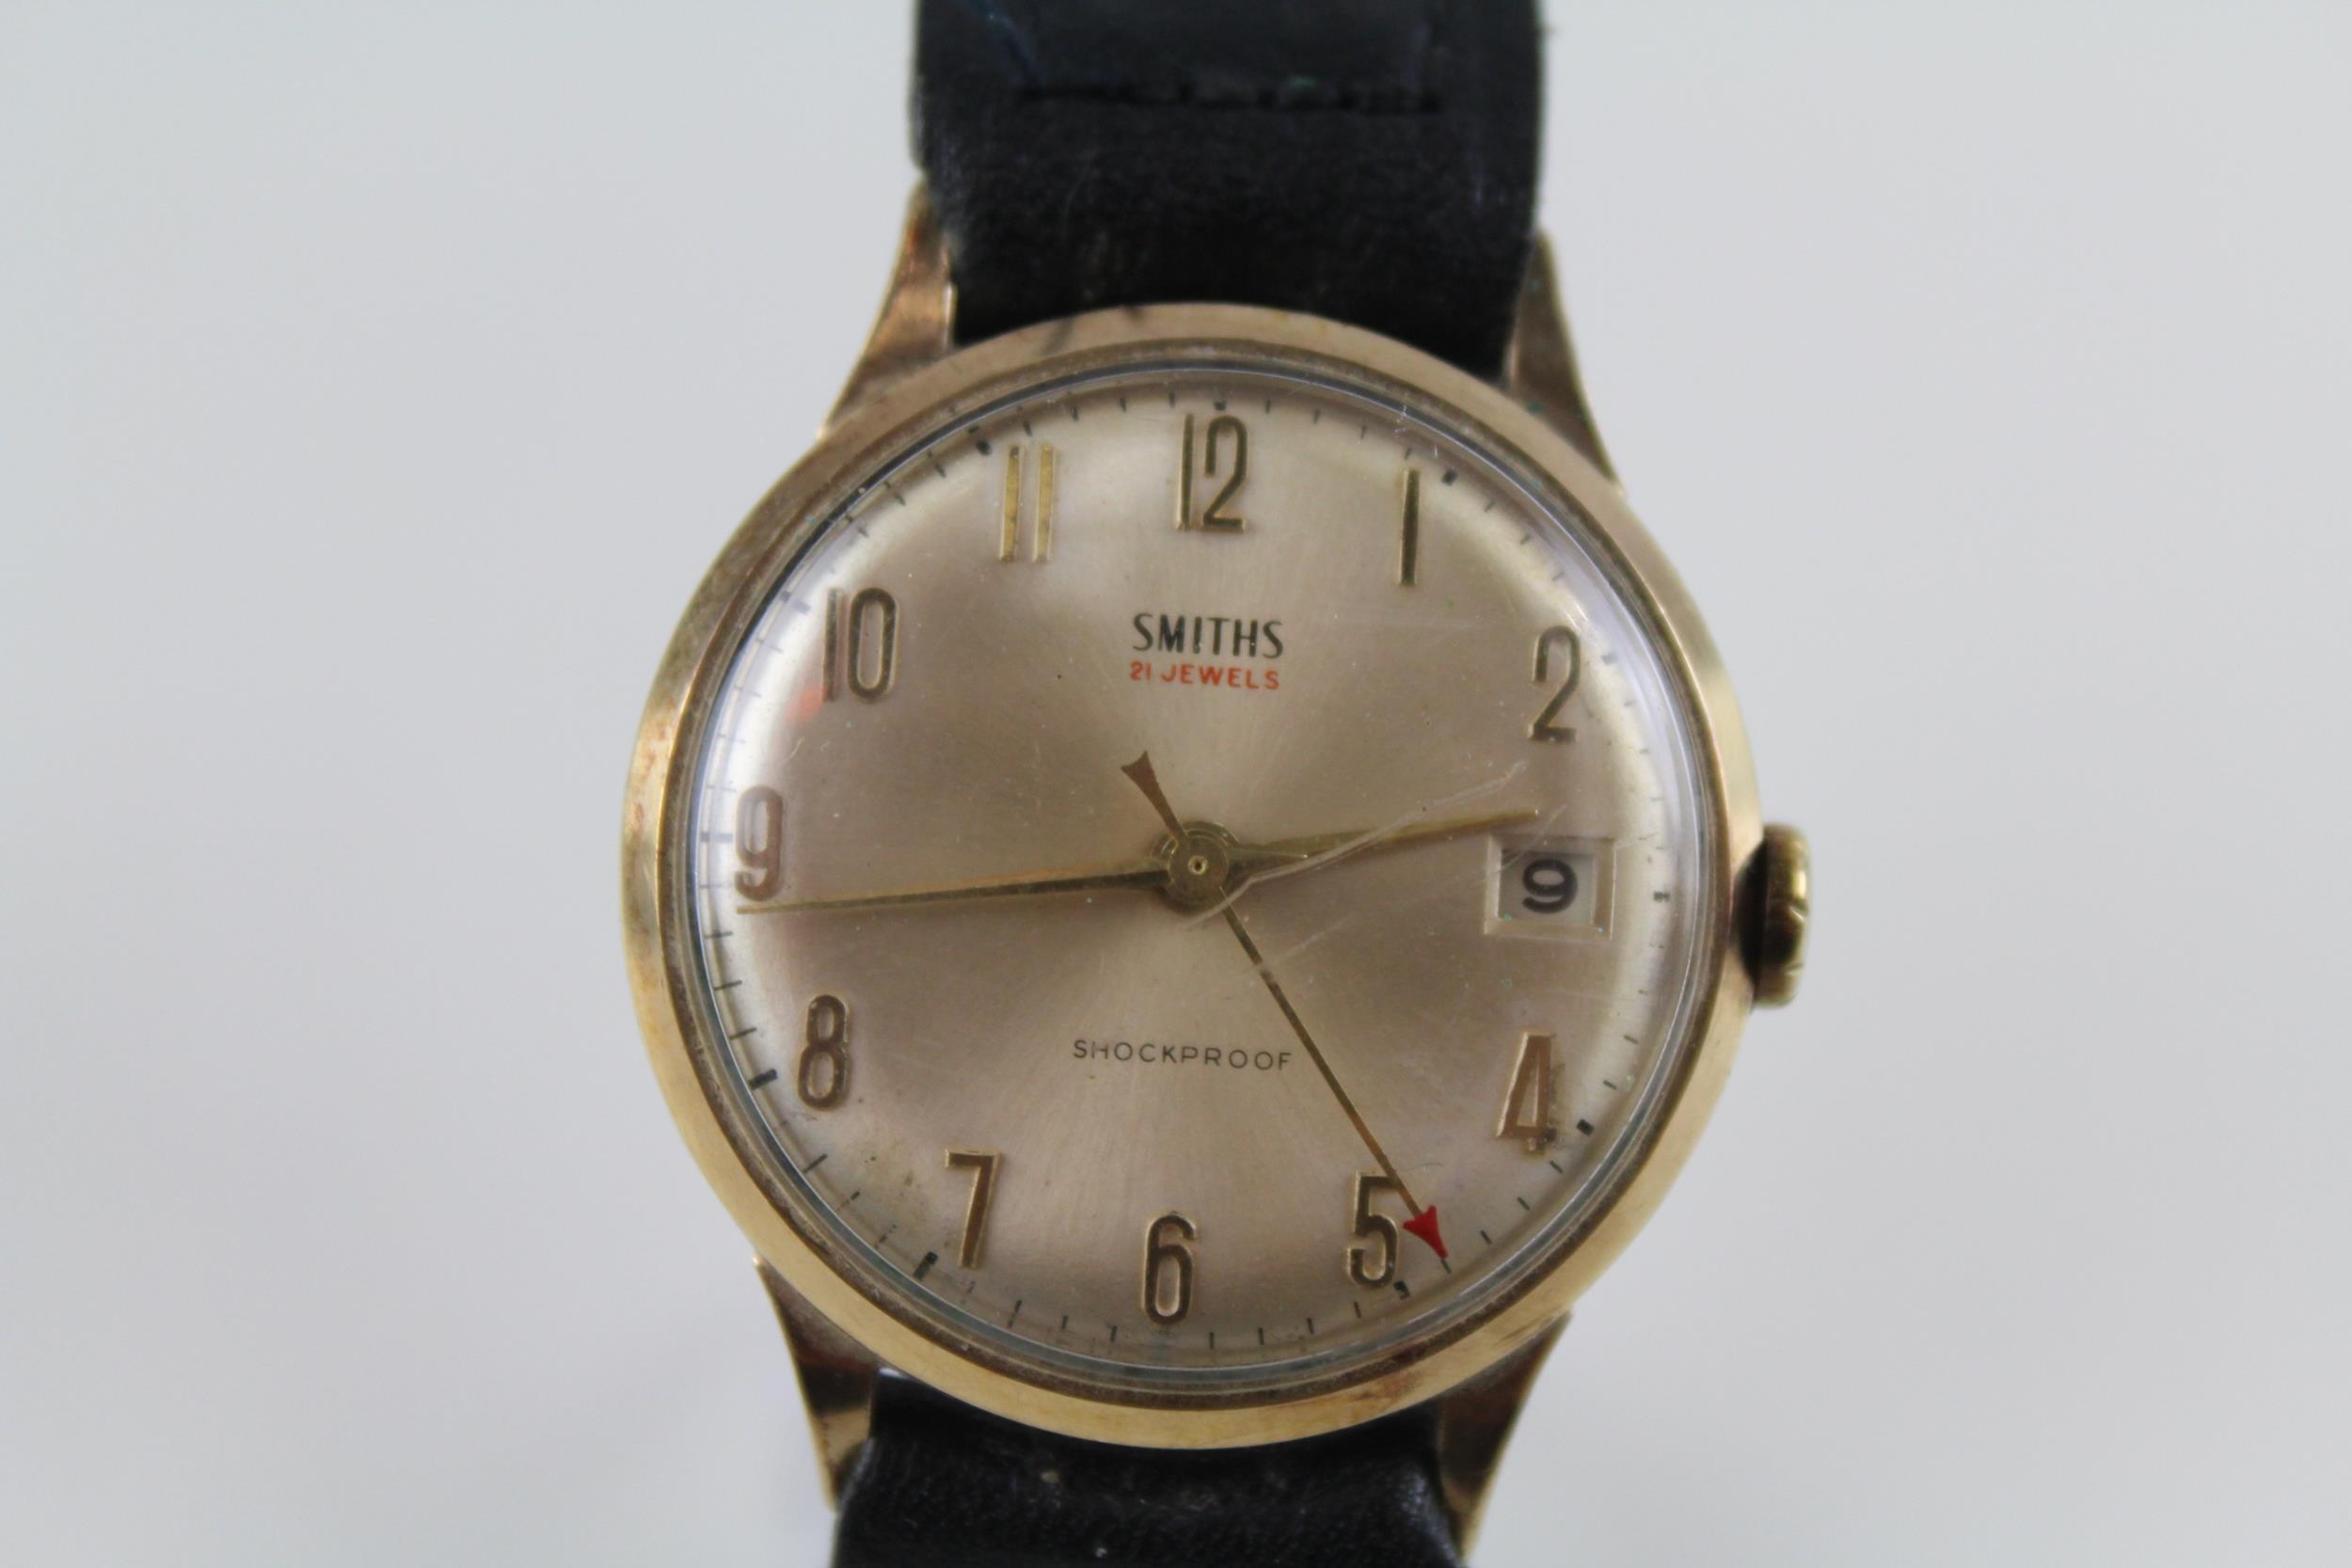 SMITHS 9ct Gold Cased Gents Vintage WRISTWATCH 21 Jewel Hand-wind WORKING // SMITHS 9ct Gold Cased - Image 2 of 6